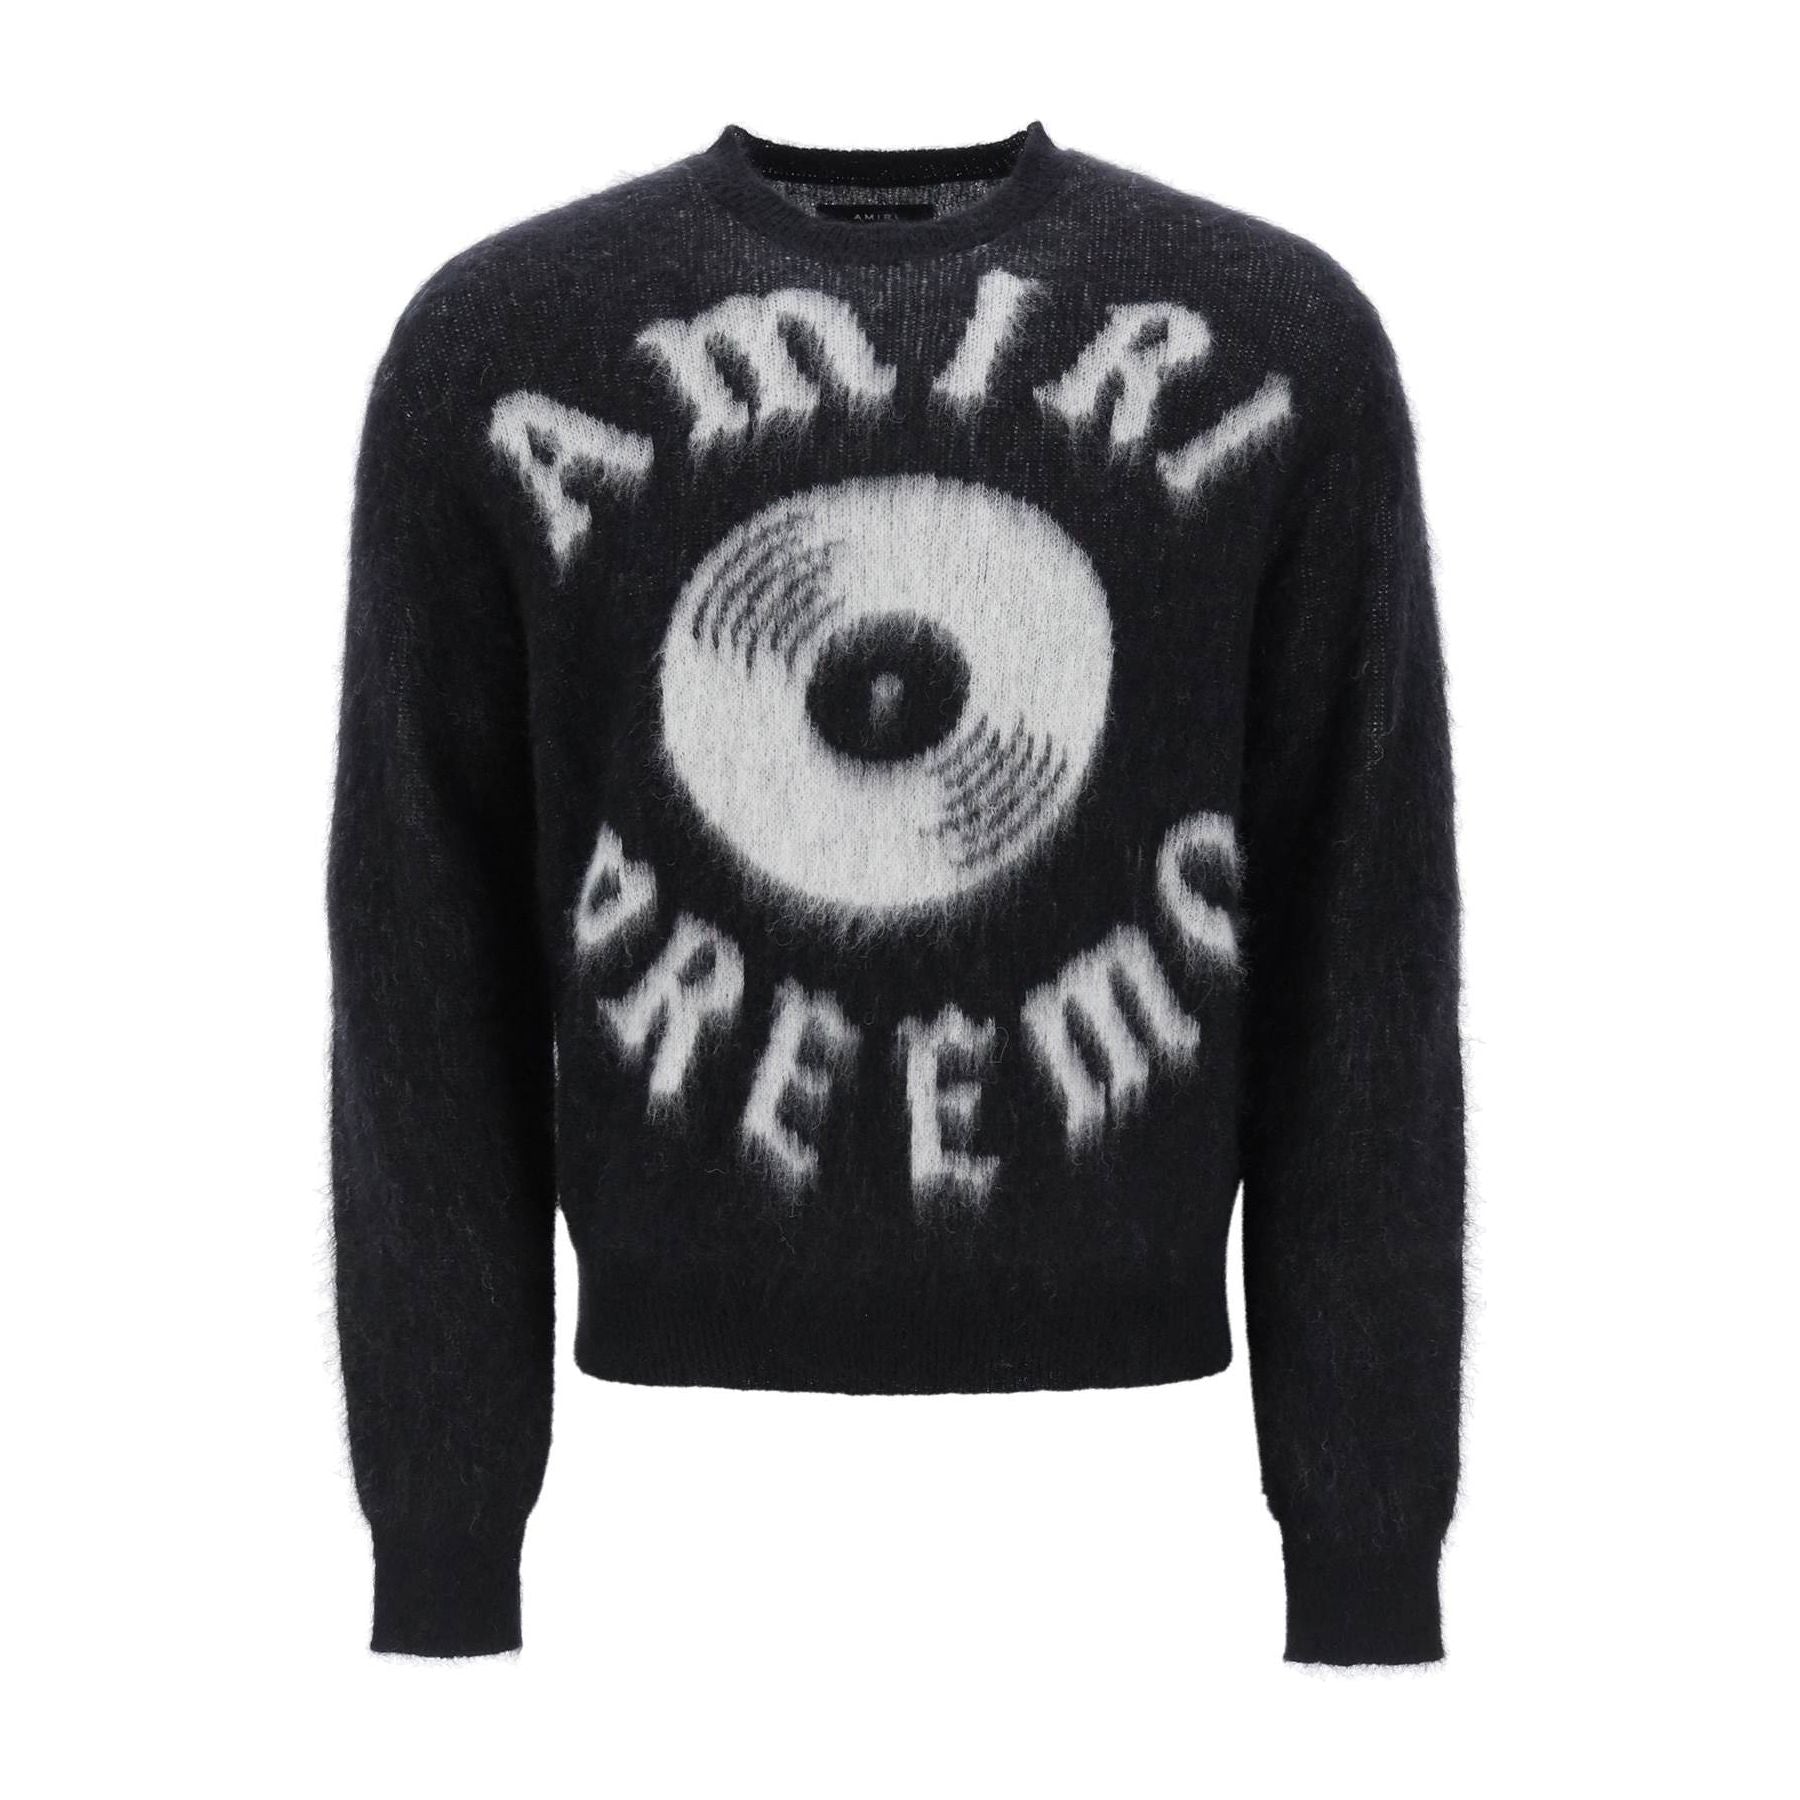 Premier Record Brushed Yarn Sweater